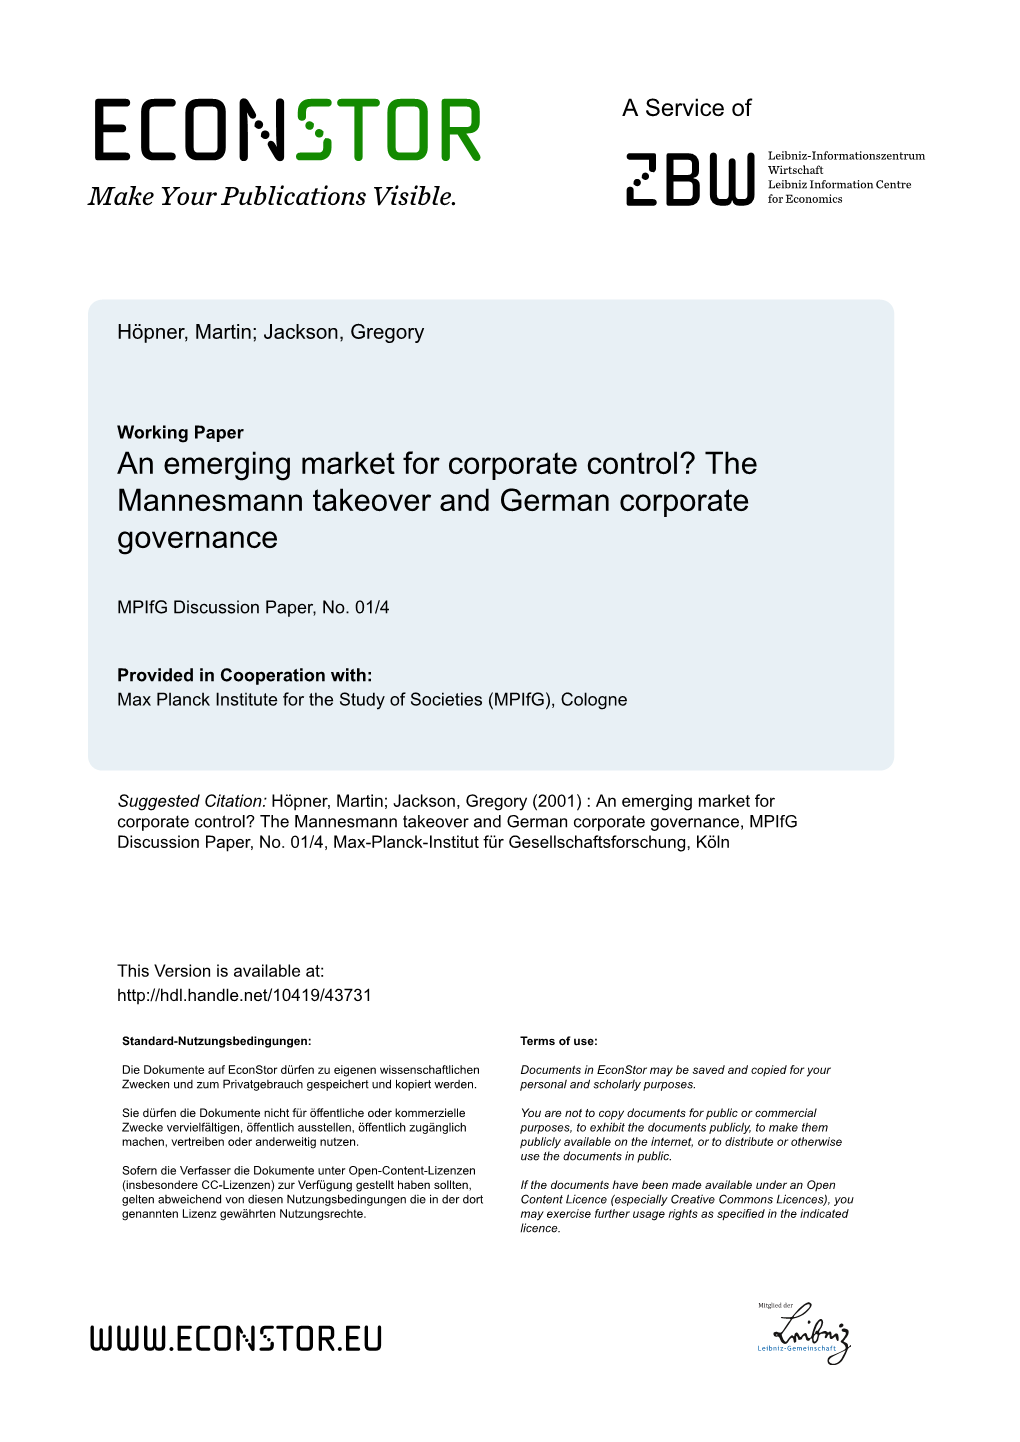 The Mannesmann Takeover and German Corporate Governance